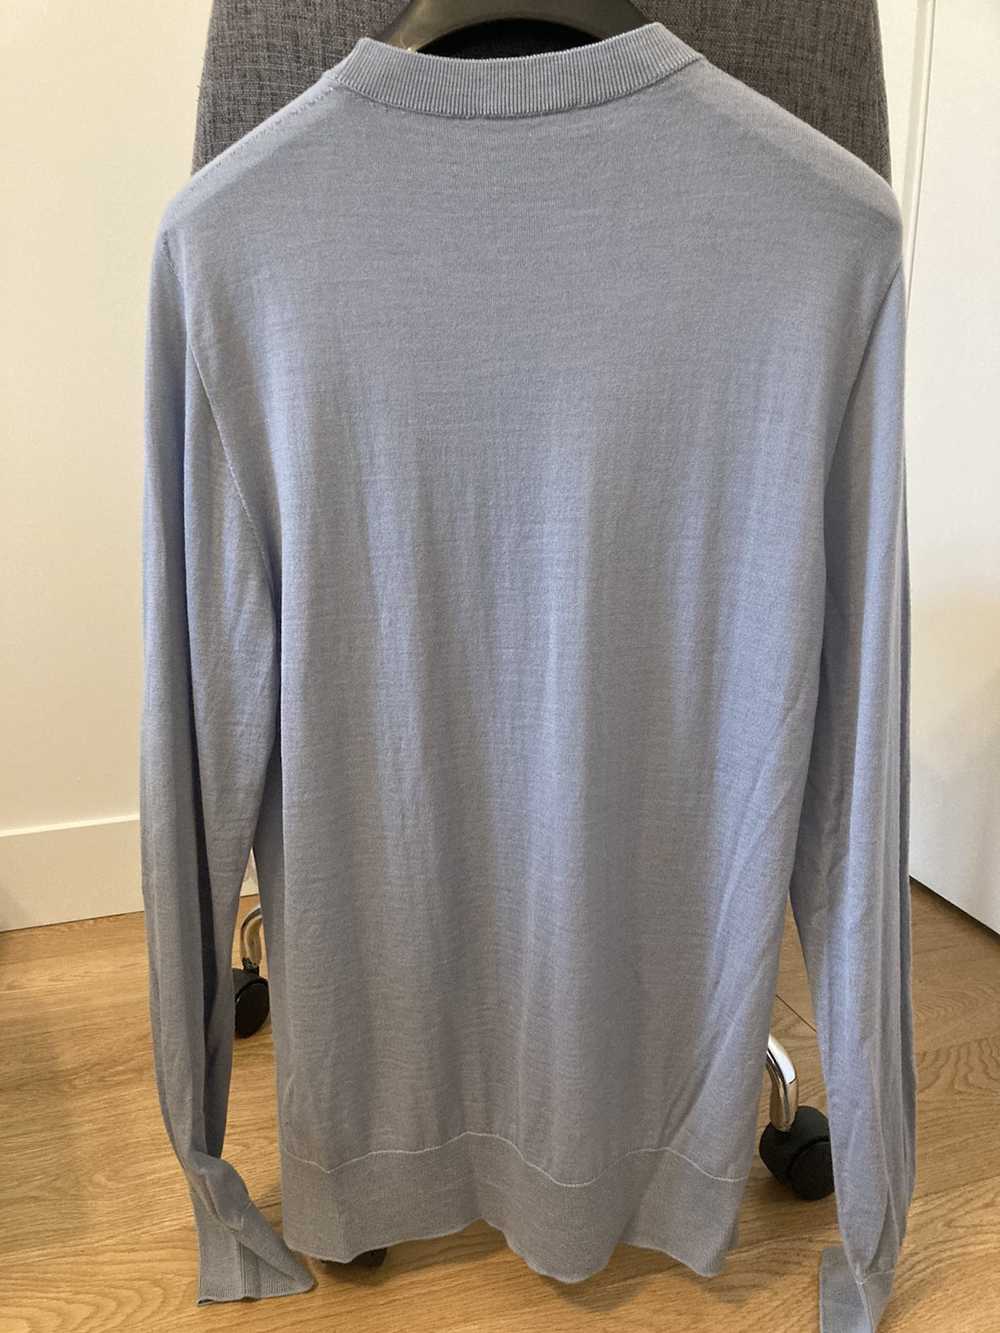 Dior Dior Homme Sweater Small Blue Grey Bee - image 5